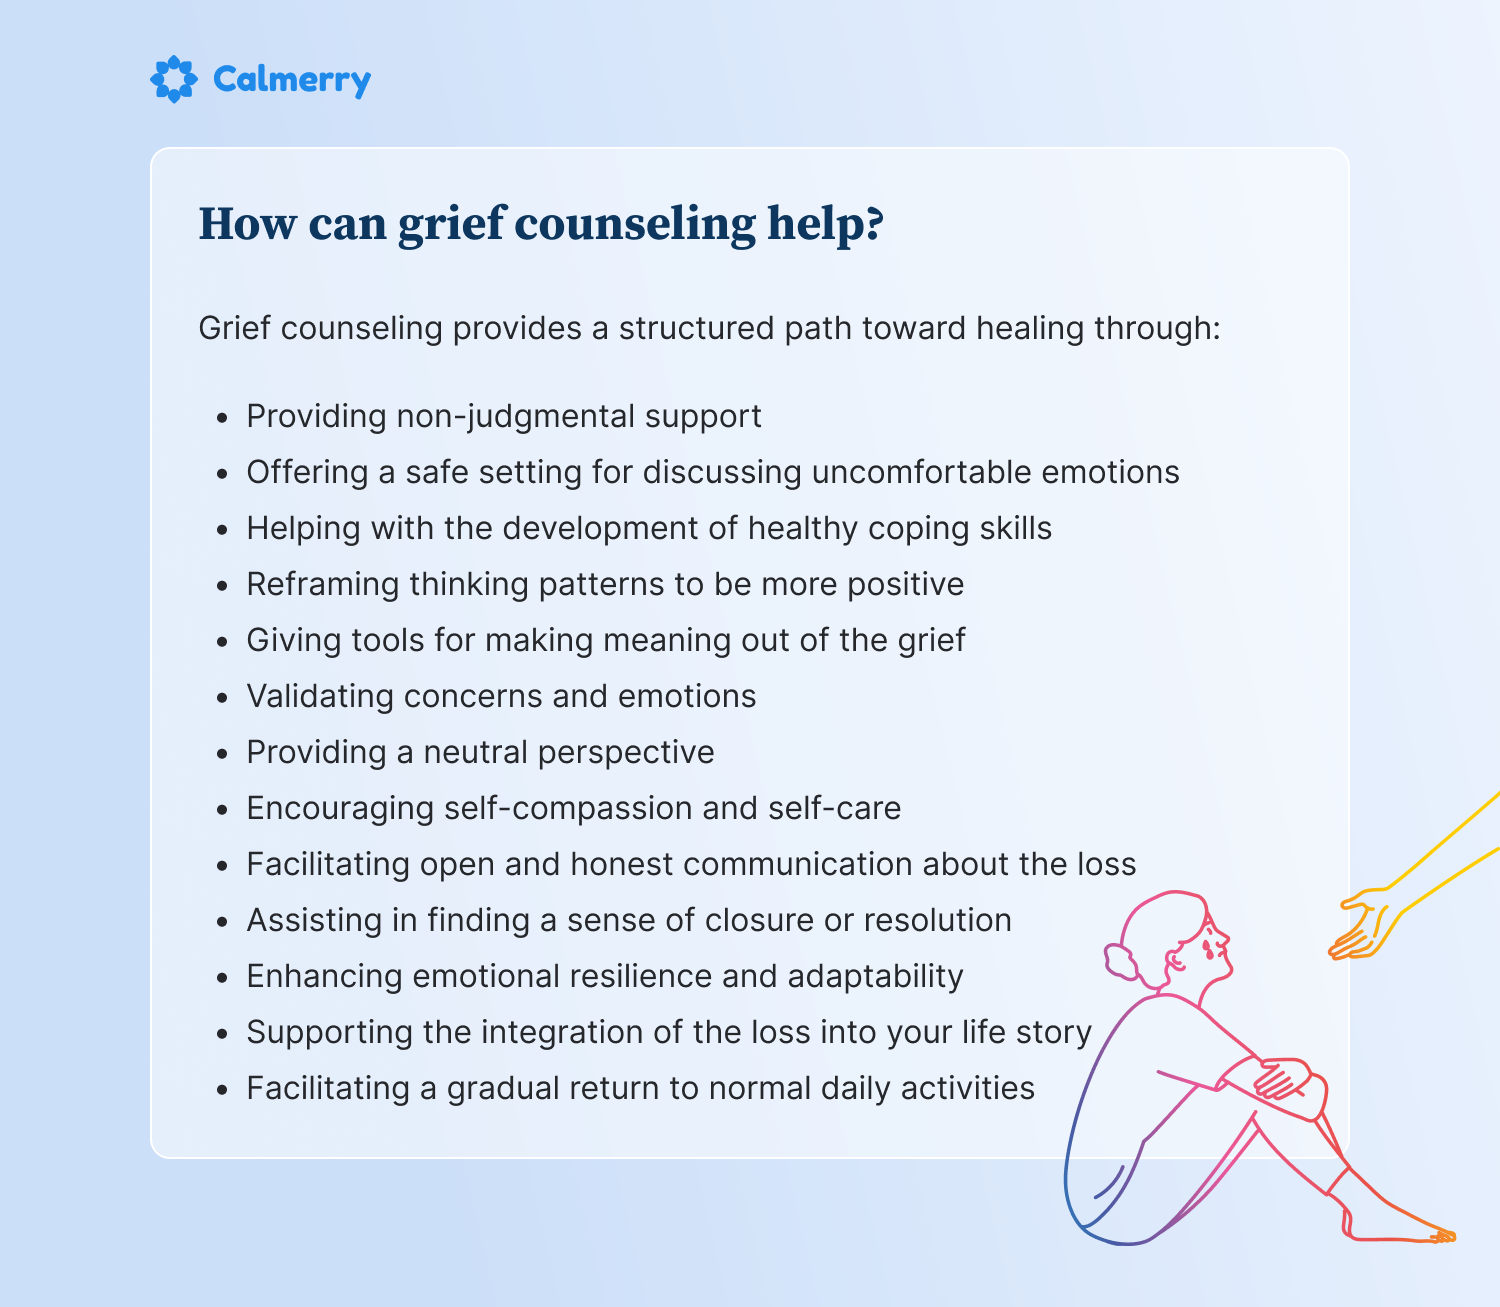 How can grief counseling help?  Grief counseling provides a structured path toward healing through:  Providing non-judgmental support Offering a safe setting for discussing uncomfortable emotions Helping with the development of healthy coping skills Reframing thinking patterns to be more positive Giving tools for making meaning out of the grief Validating concerns and emotions Providing a neutral perspective Encouraging self-compassion and self-care Facilitating open and honest communication about the loss Assisting in finding a sense of closure or resolution Enhancing emotional resilience and adaptability Supporting the integration of the loss into your life story Facilitating a gradual return to normal daily activities